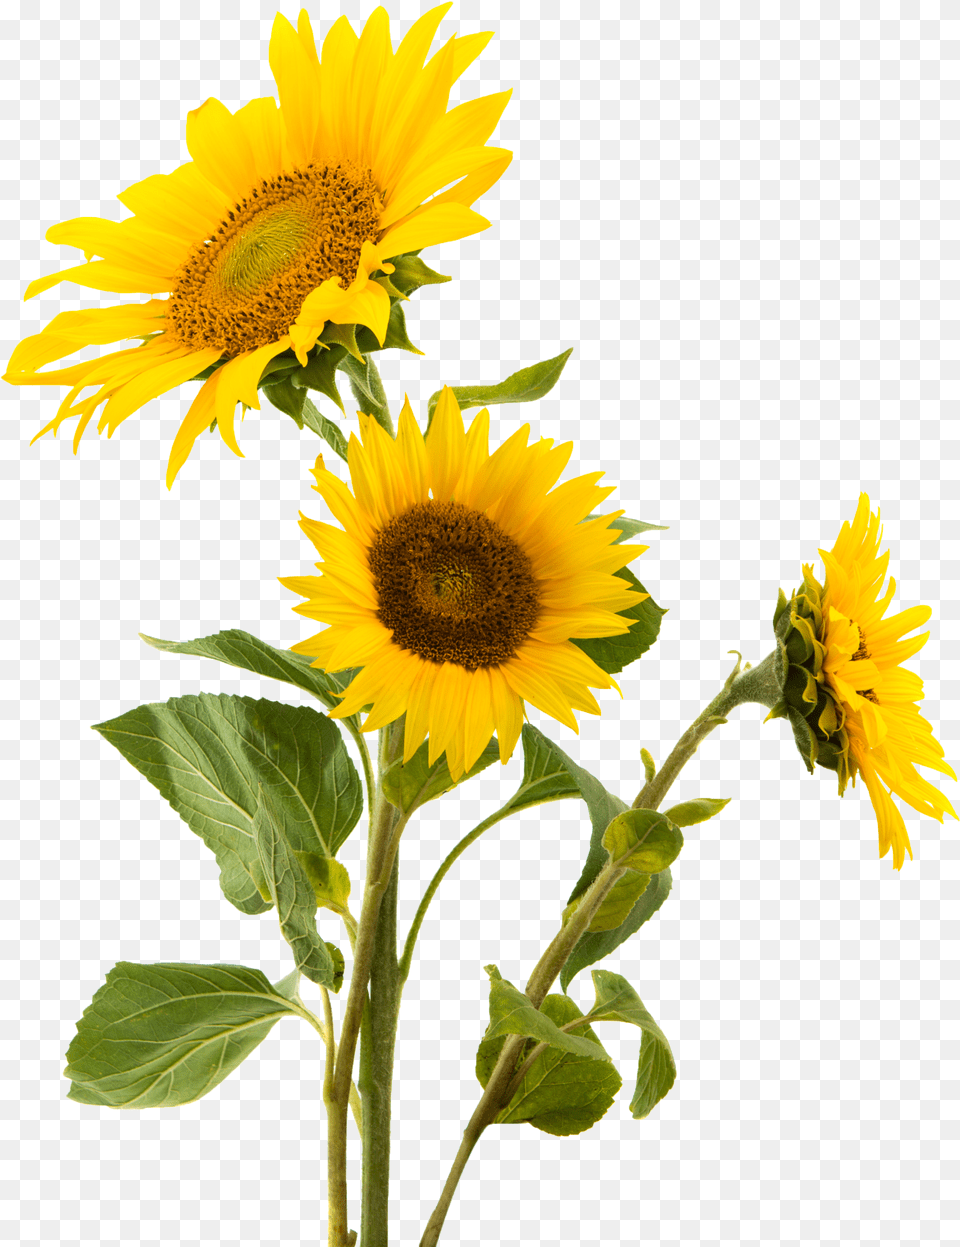 Common Sunflower Nut Gluten Snack Transparent Background Sunflower Photo Free Png Download